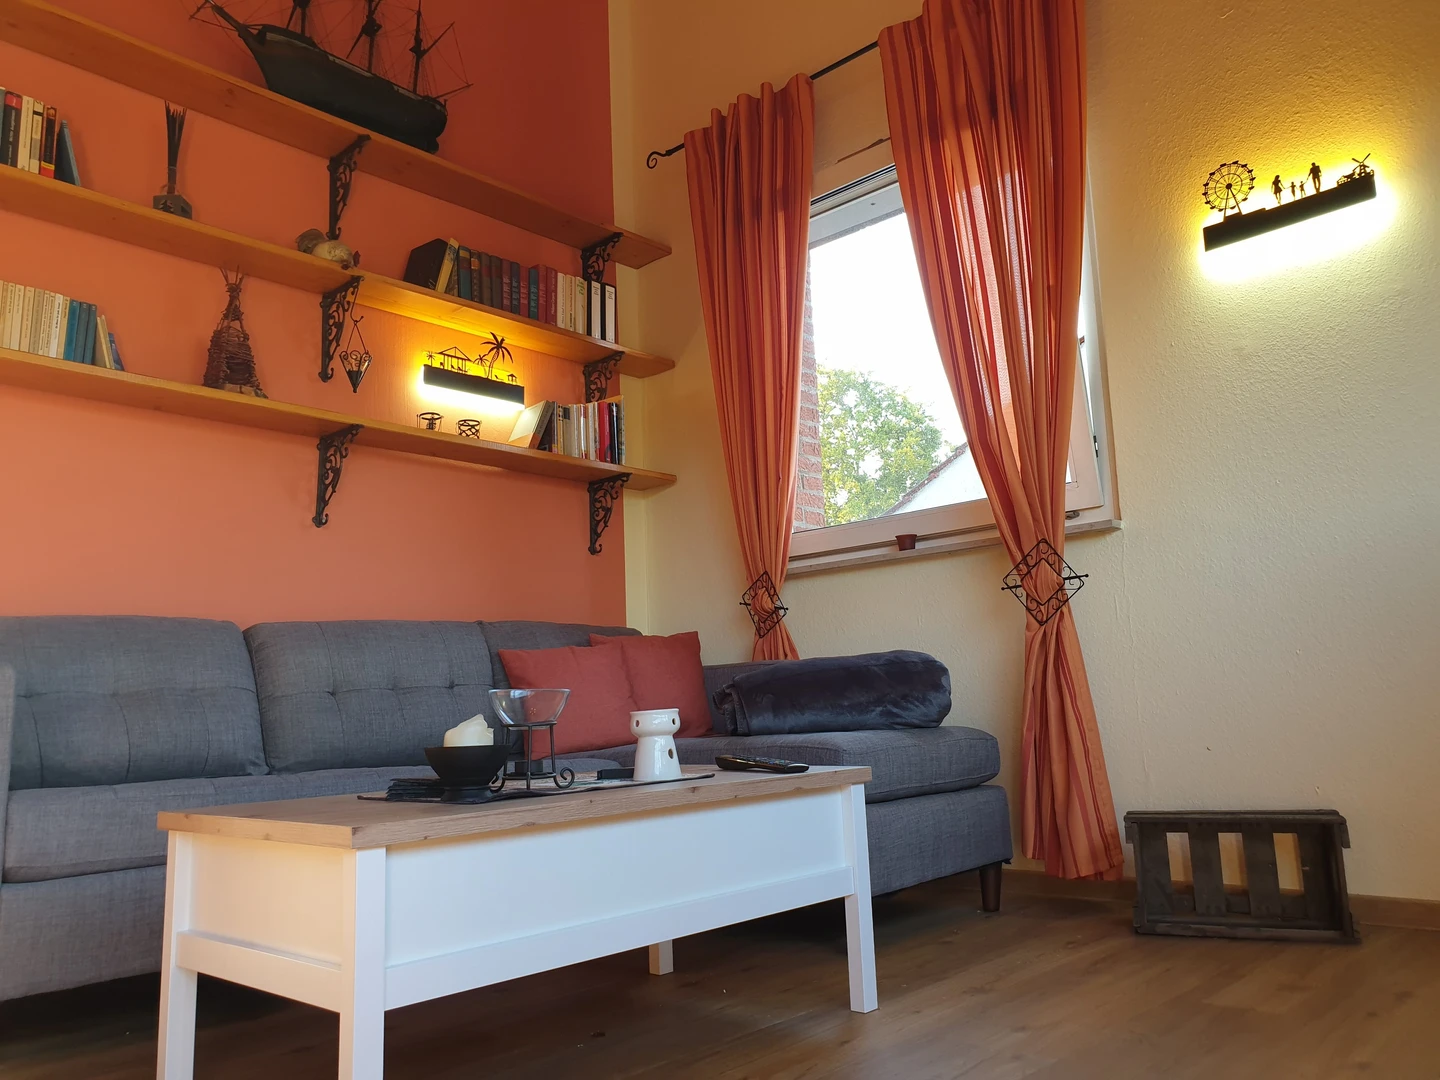 Room for rent in a shared flat in Bergisch Gladbach